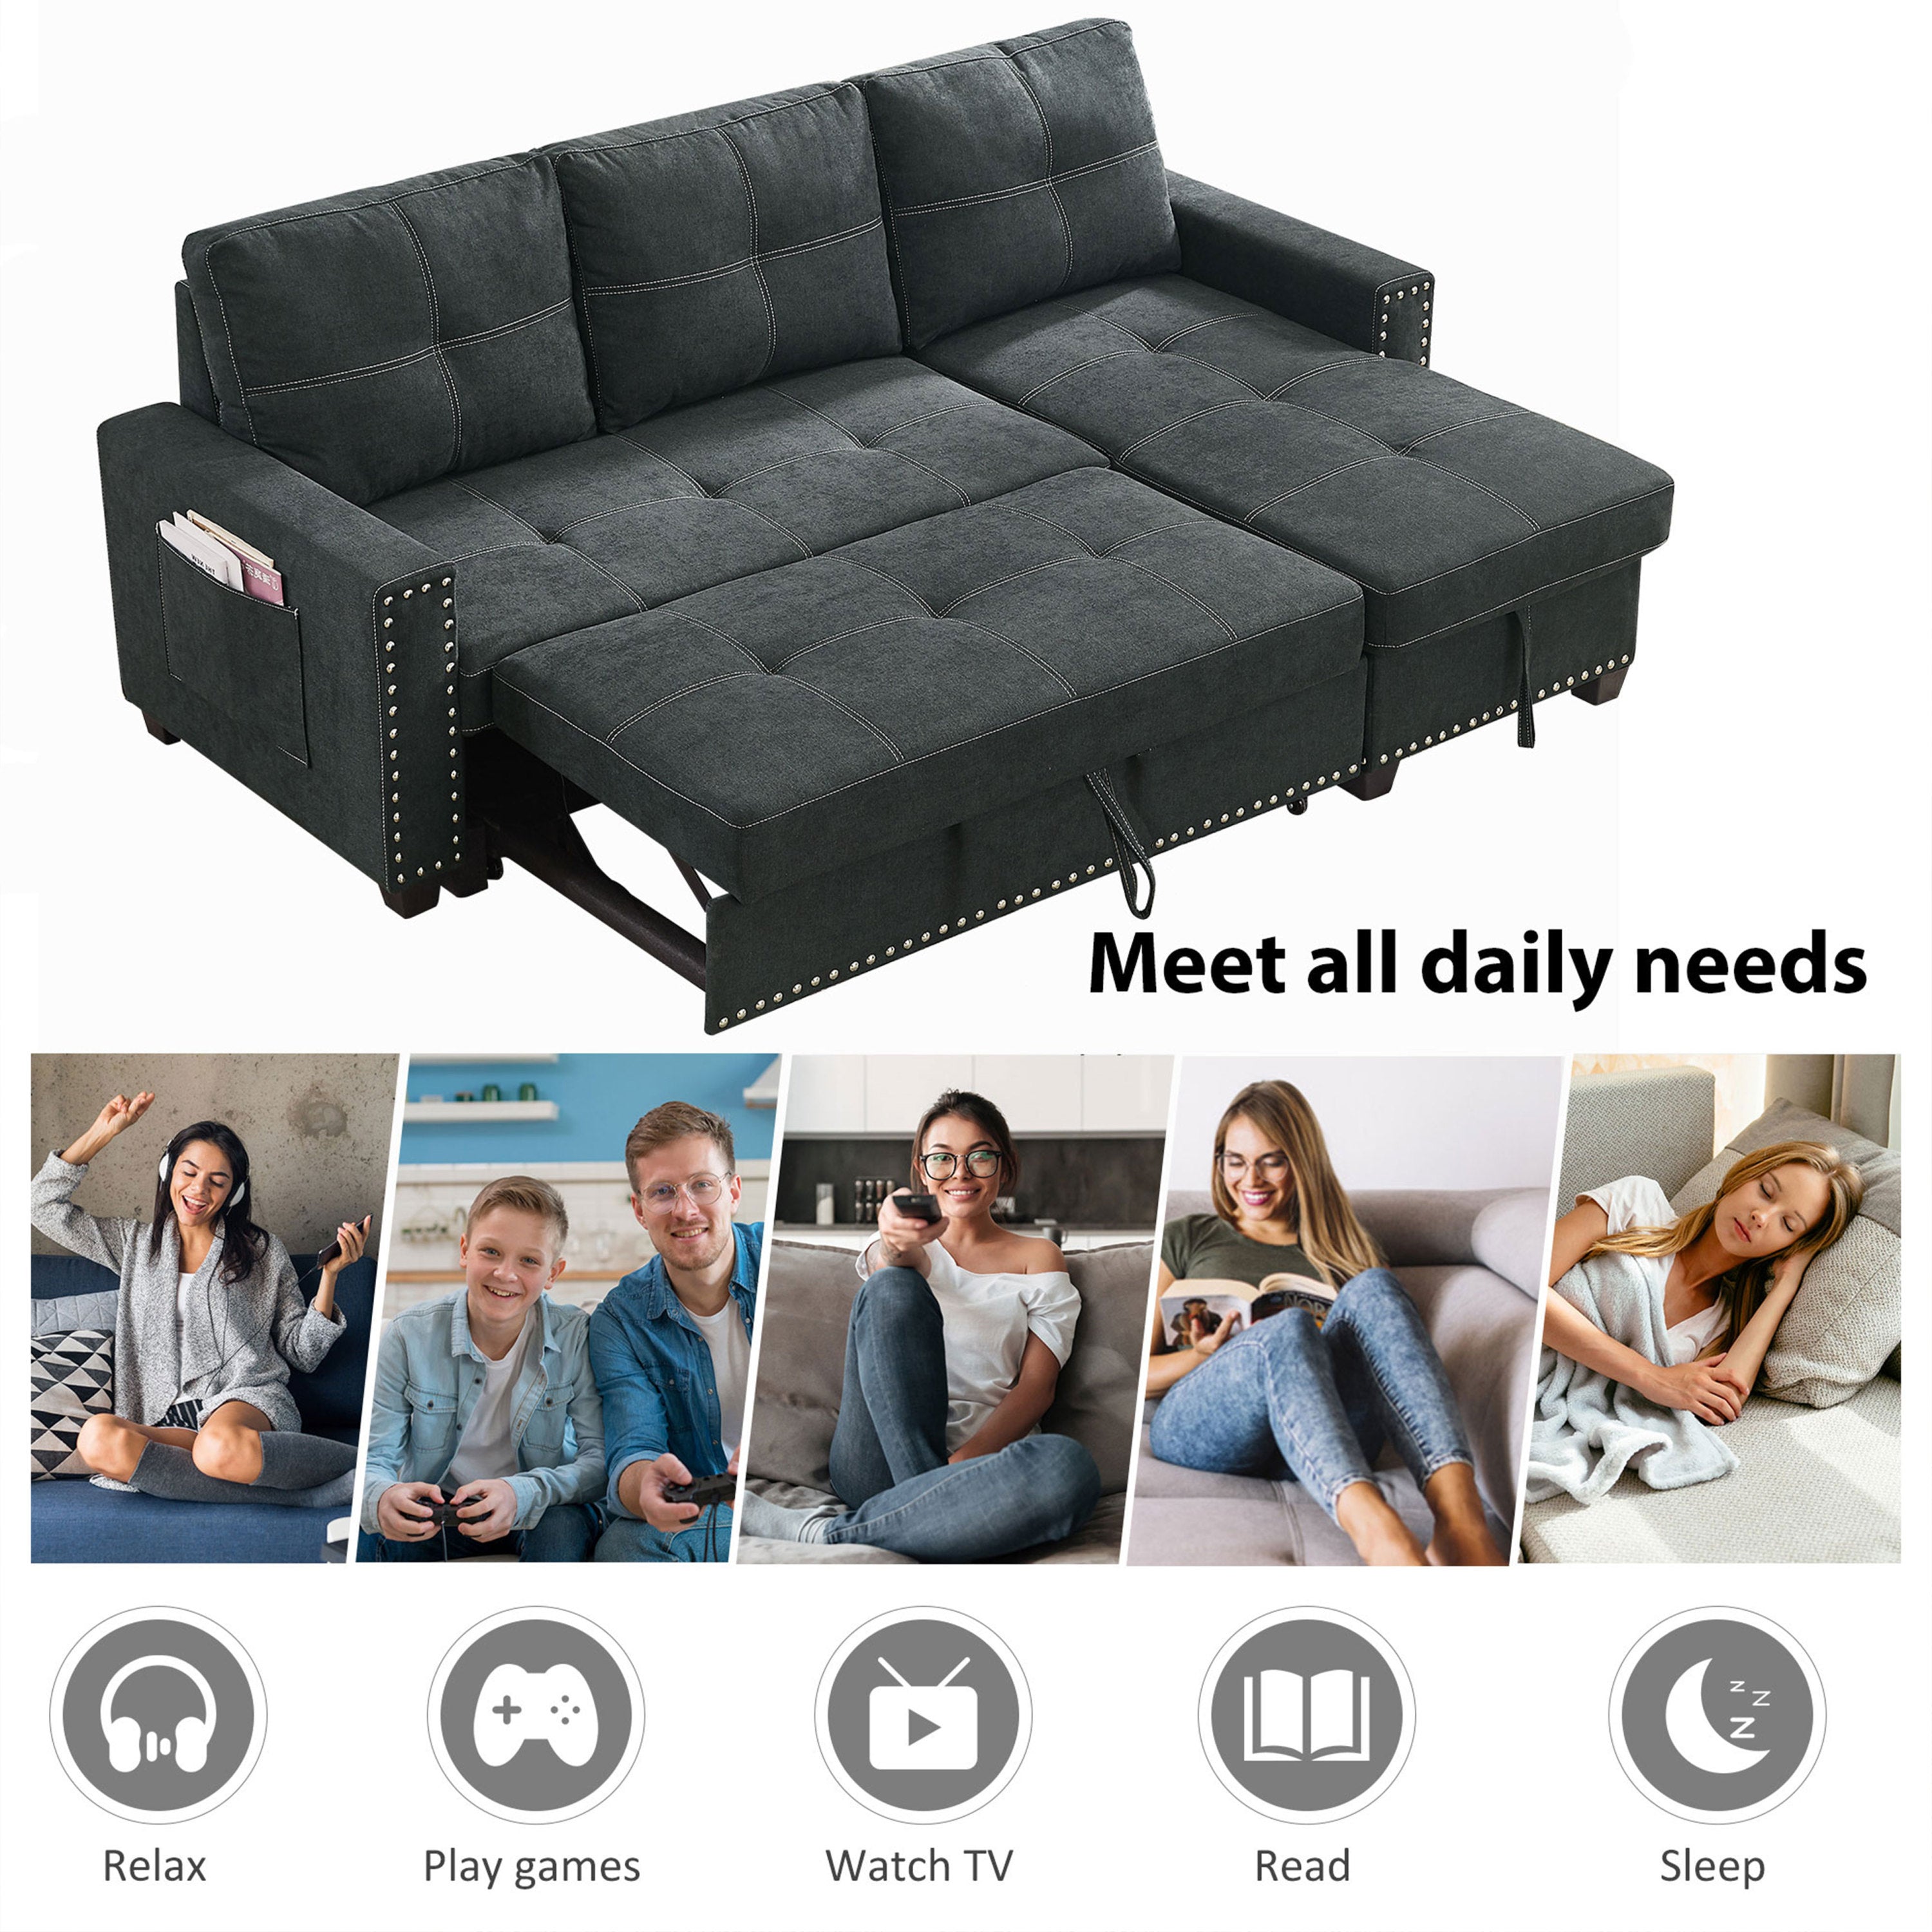 82" Reversible Sleeper Sofa Bed Sectional with Storage Chaise - Side Storage Bag, Silver Rivet Accents - Stylish Living Room Furniture